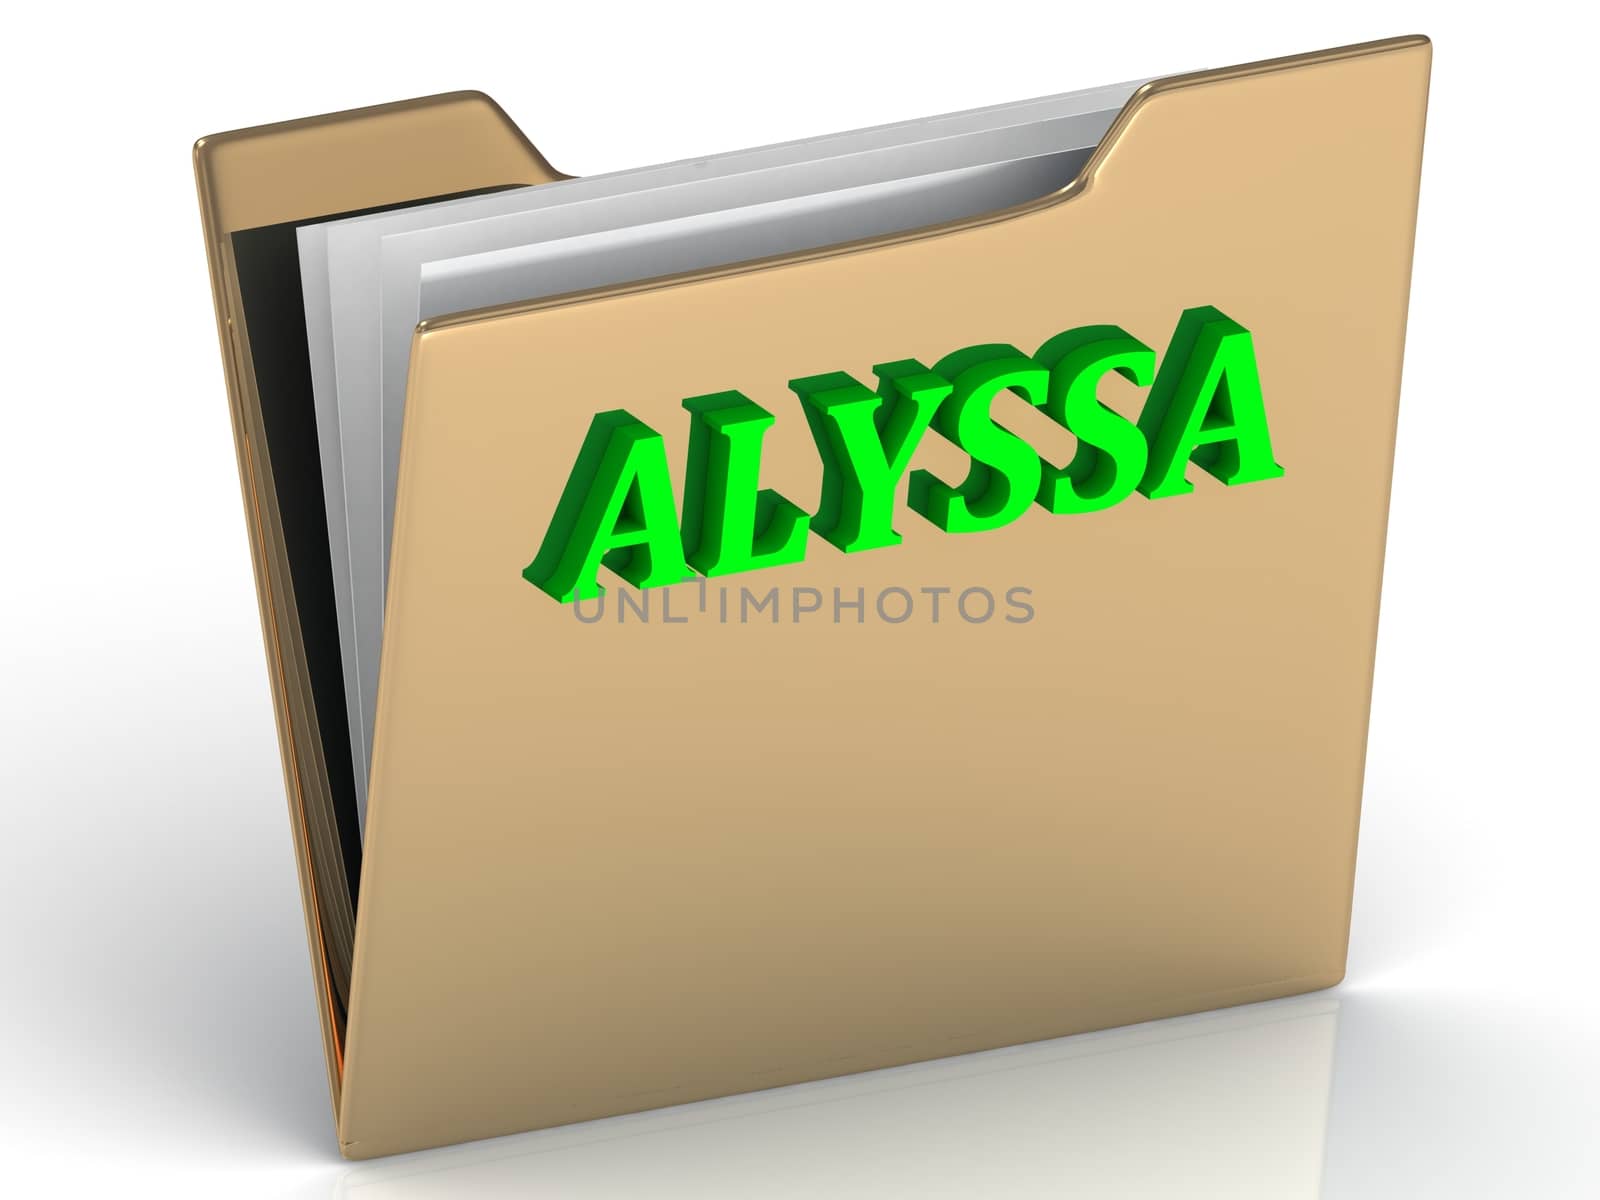 ALYSSA- bright green letters on gold paperwork folder by GreenMost